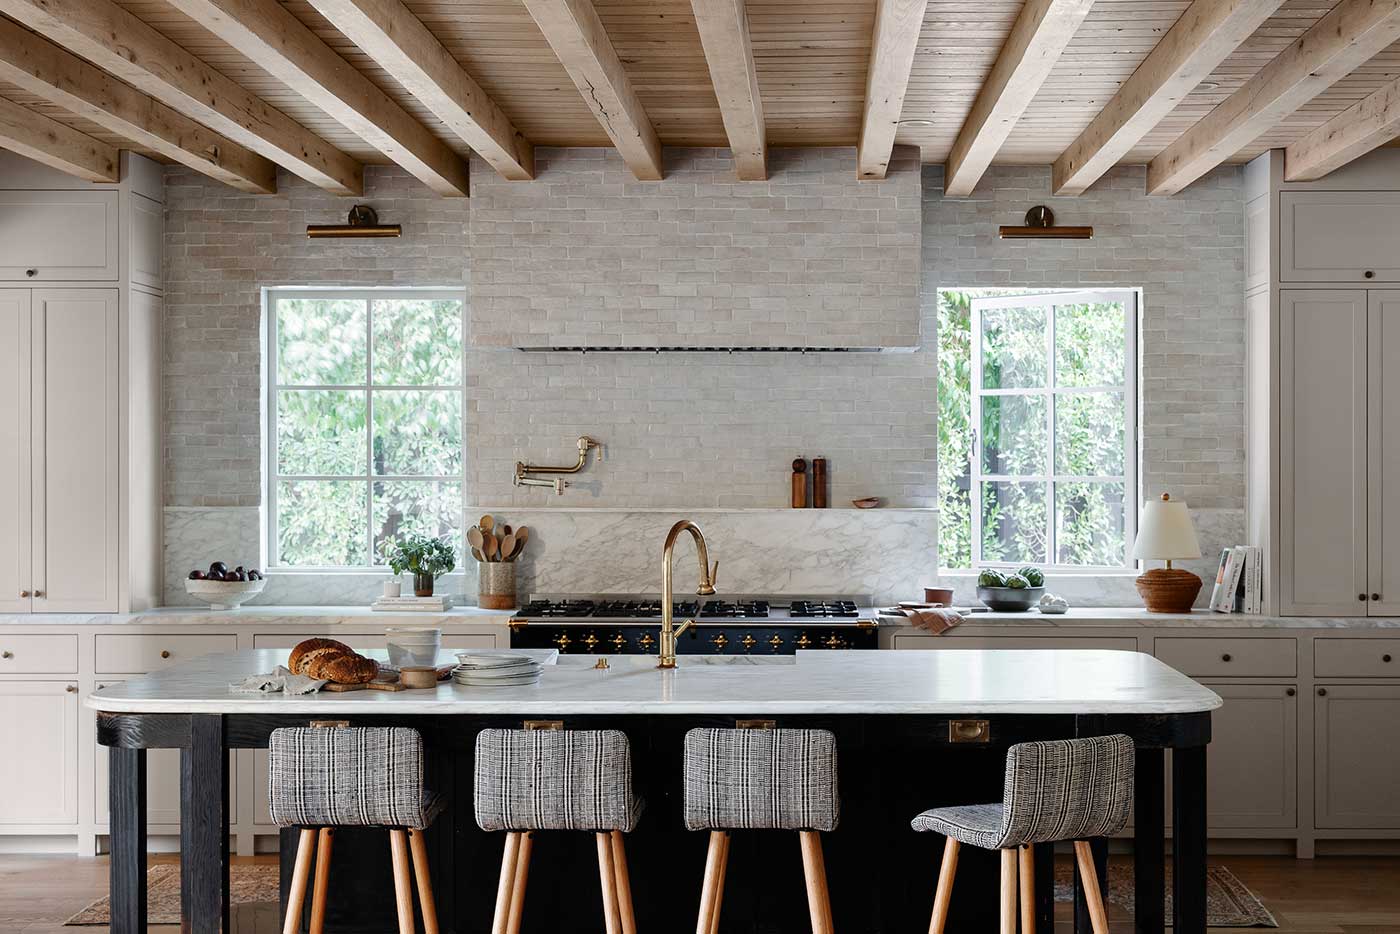 Rustic Modern Kitchen Features Black Windows with Grilles